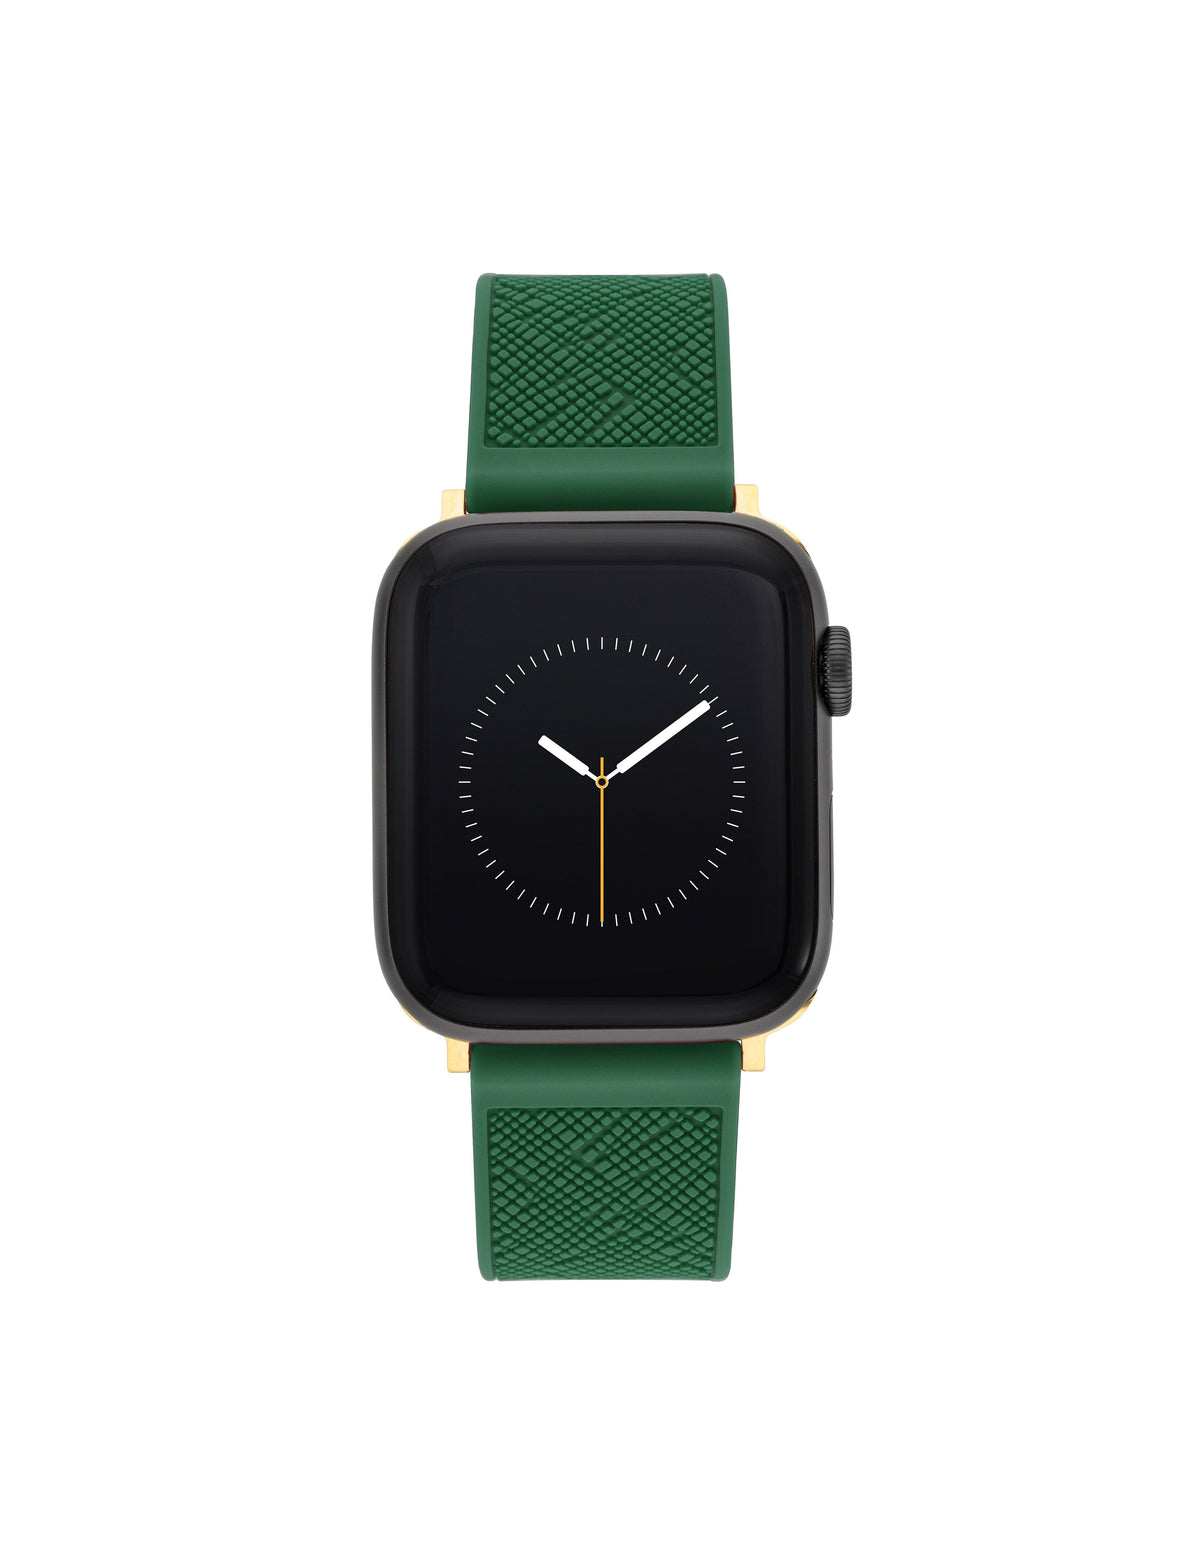 Anne Klein Gold-Tone/ Green Silicone Textured Band for Apple Watch®